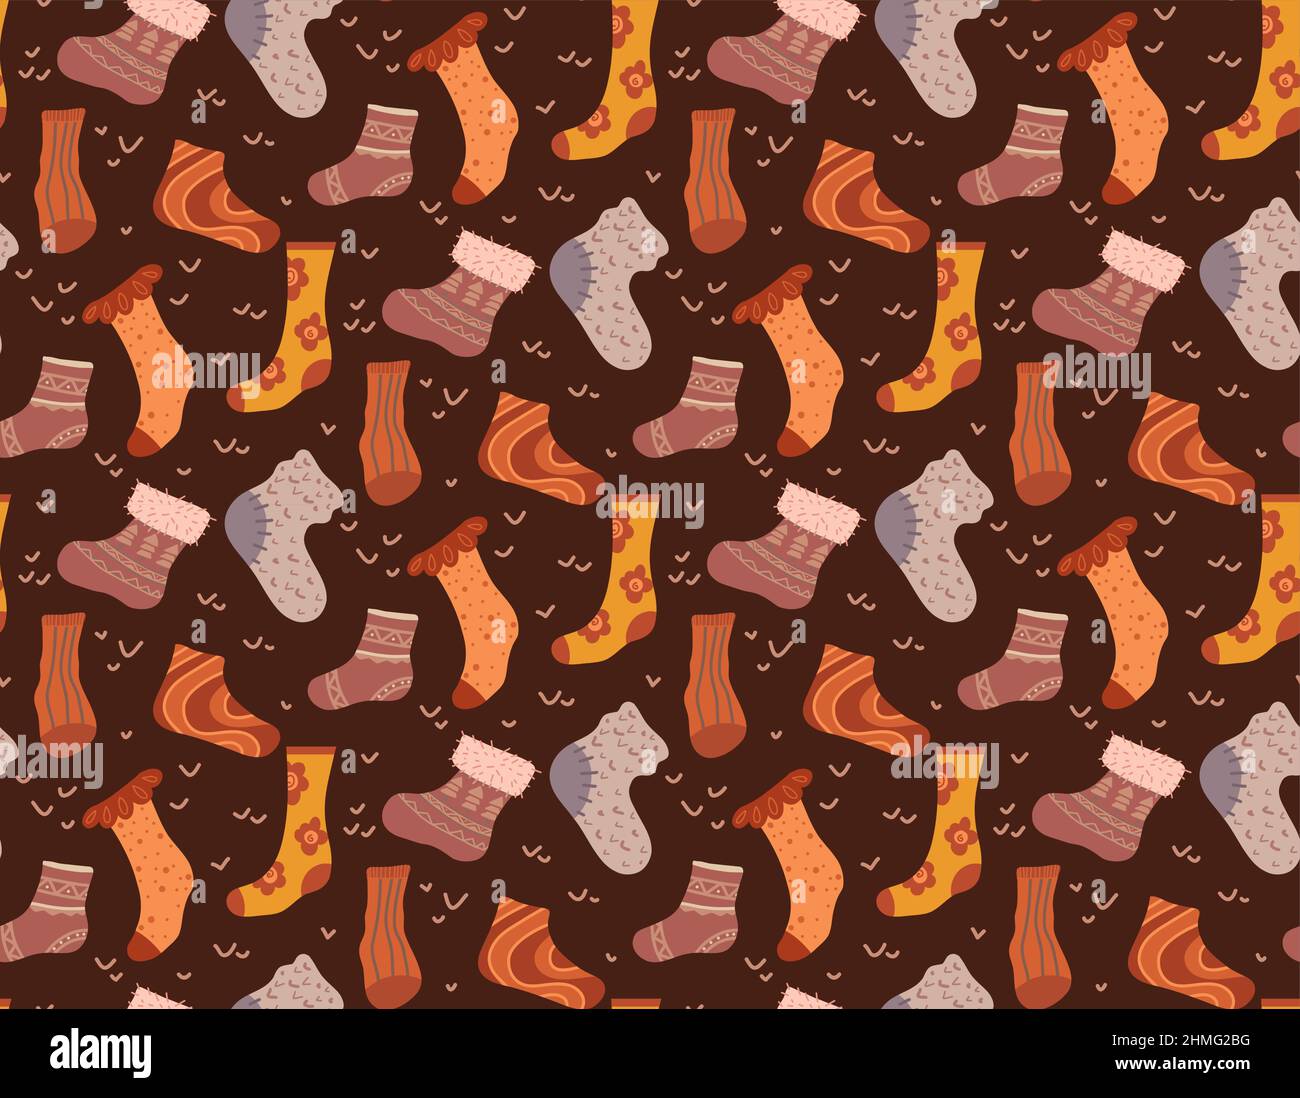 Vector cozy seamless pattern with warm socks in brown colors